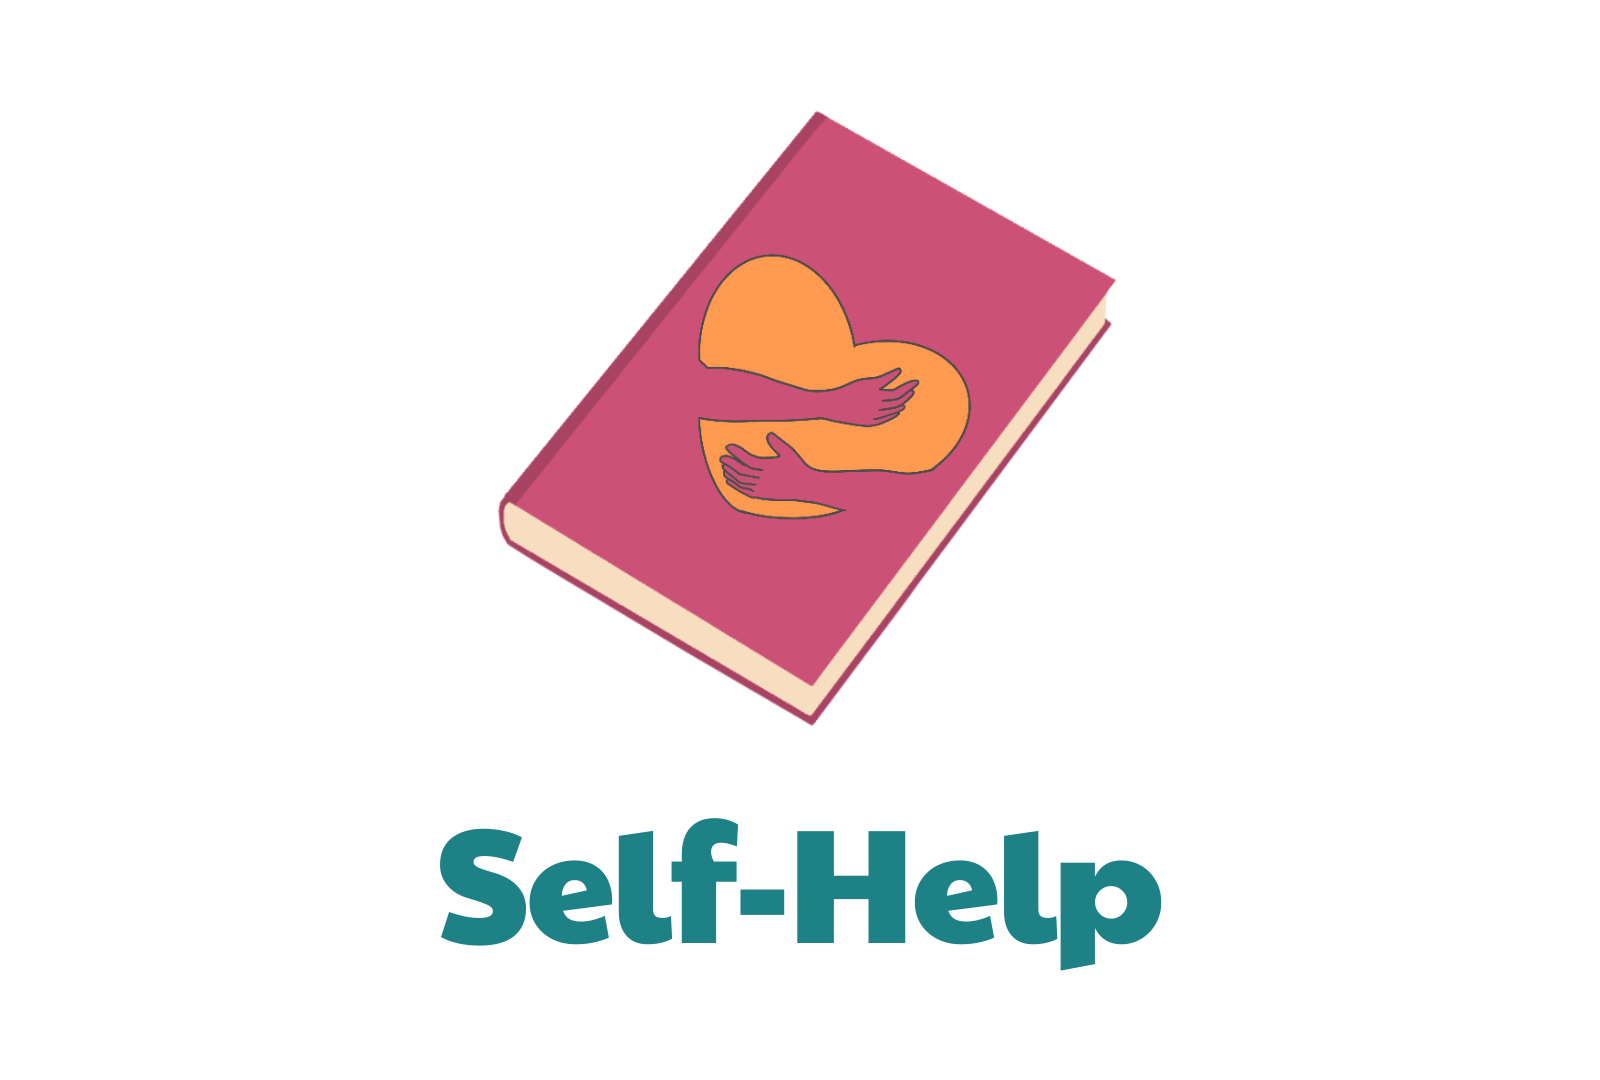 self-help, looking after your wellbeing